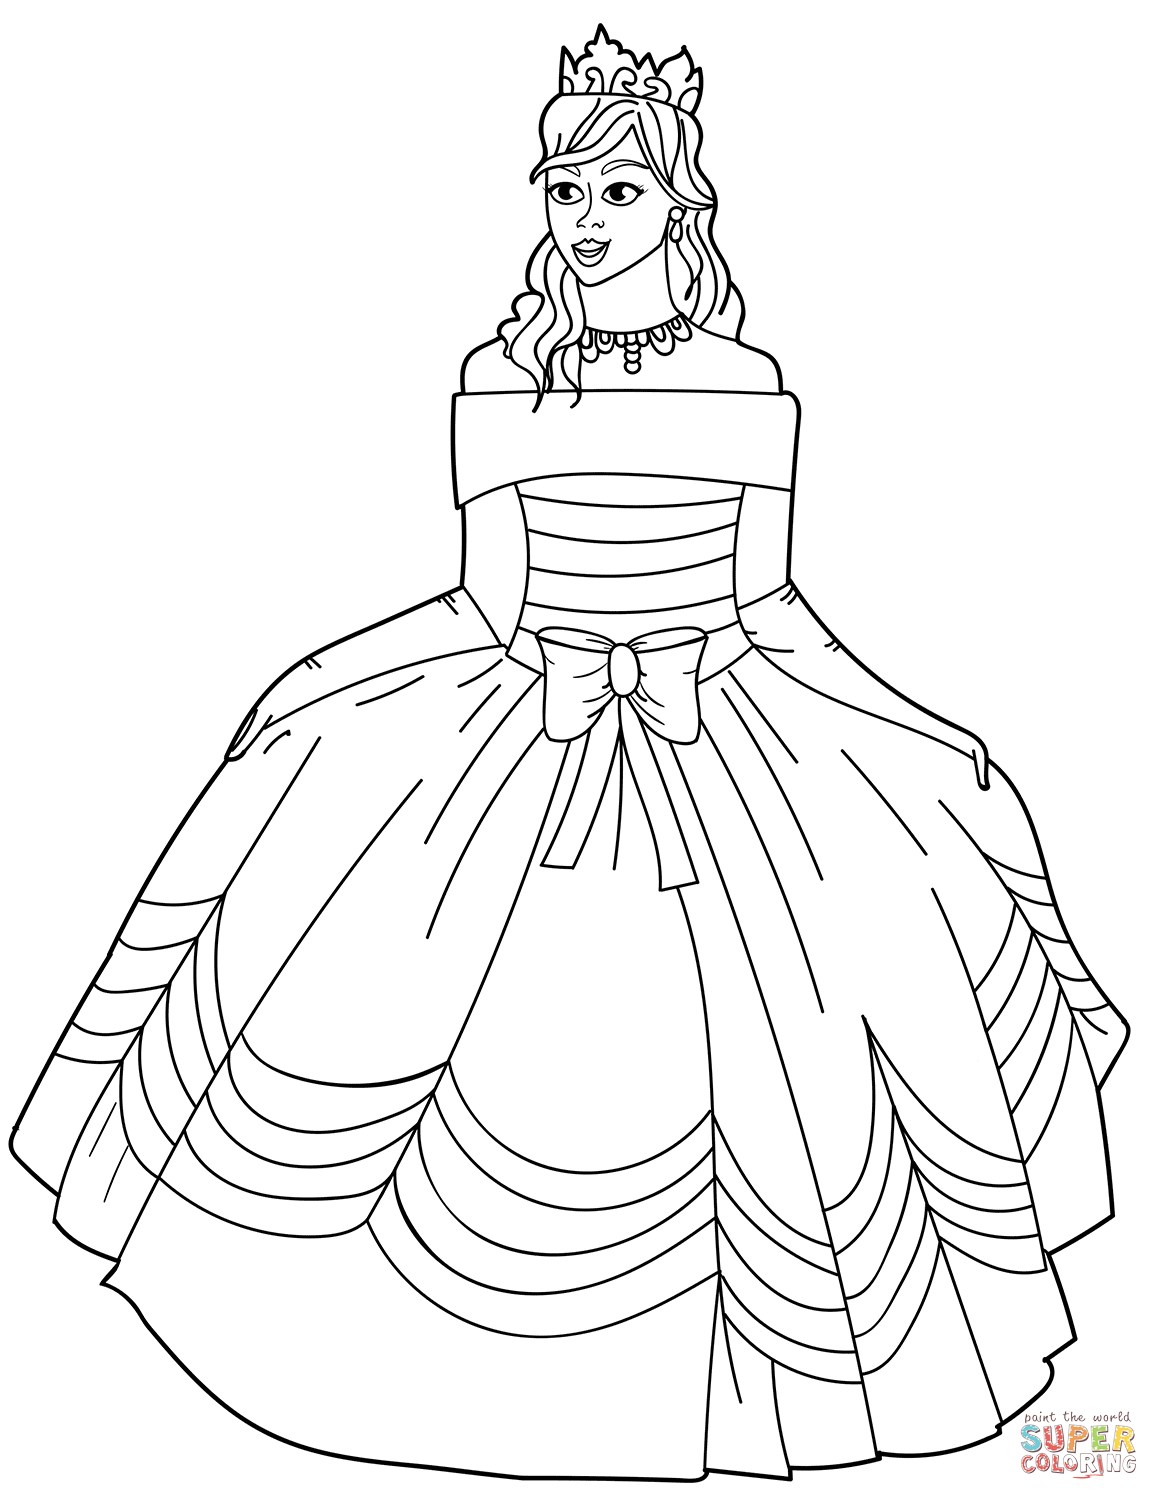 Princess in ball gown off